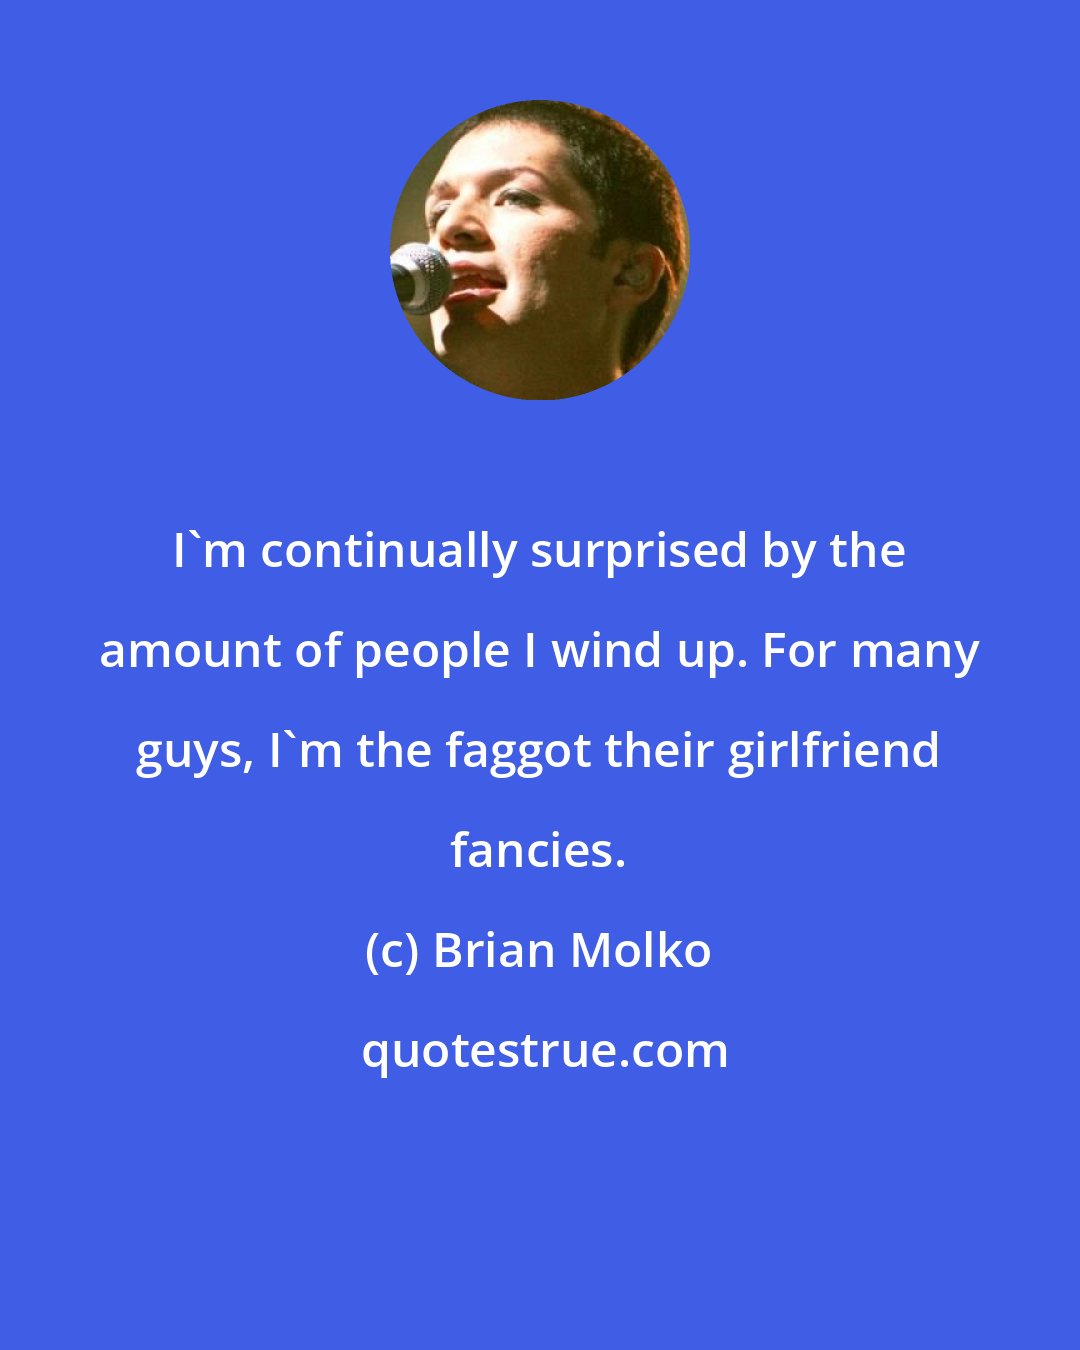 Brian Molko: I'm continually surprised by the amount of people I wind up. For many guys, I'm the faggot their girlfriend fancies.